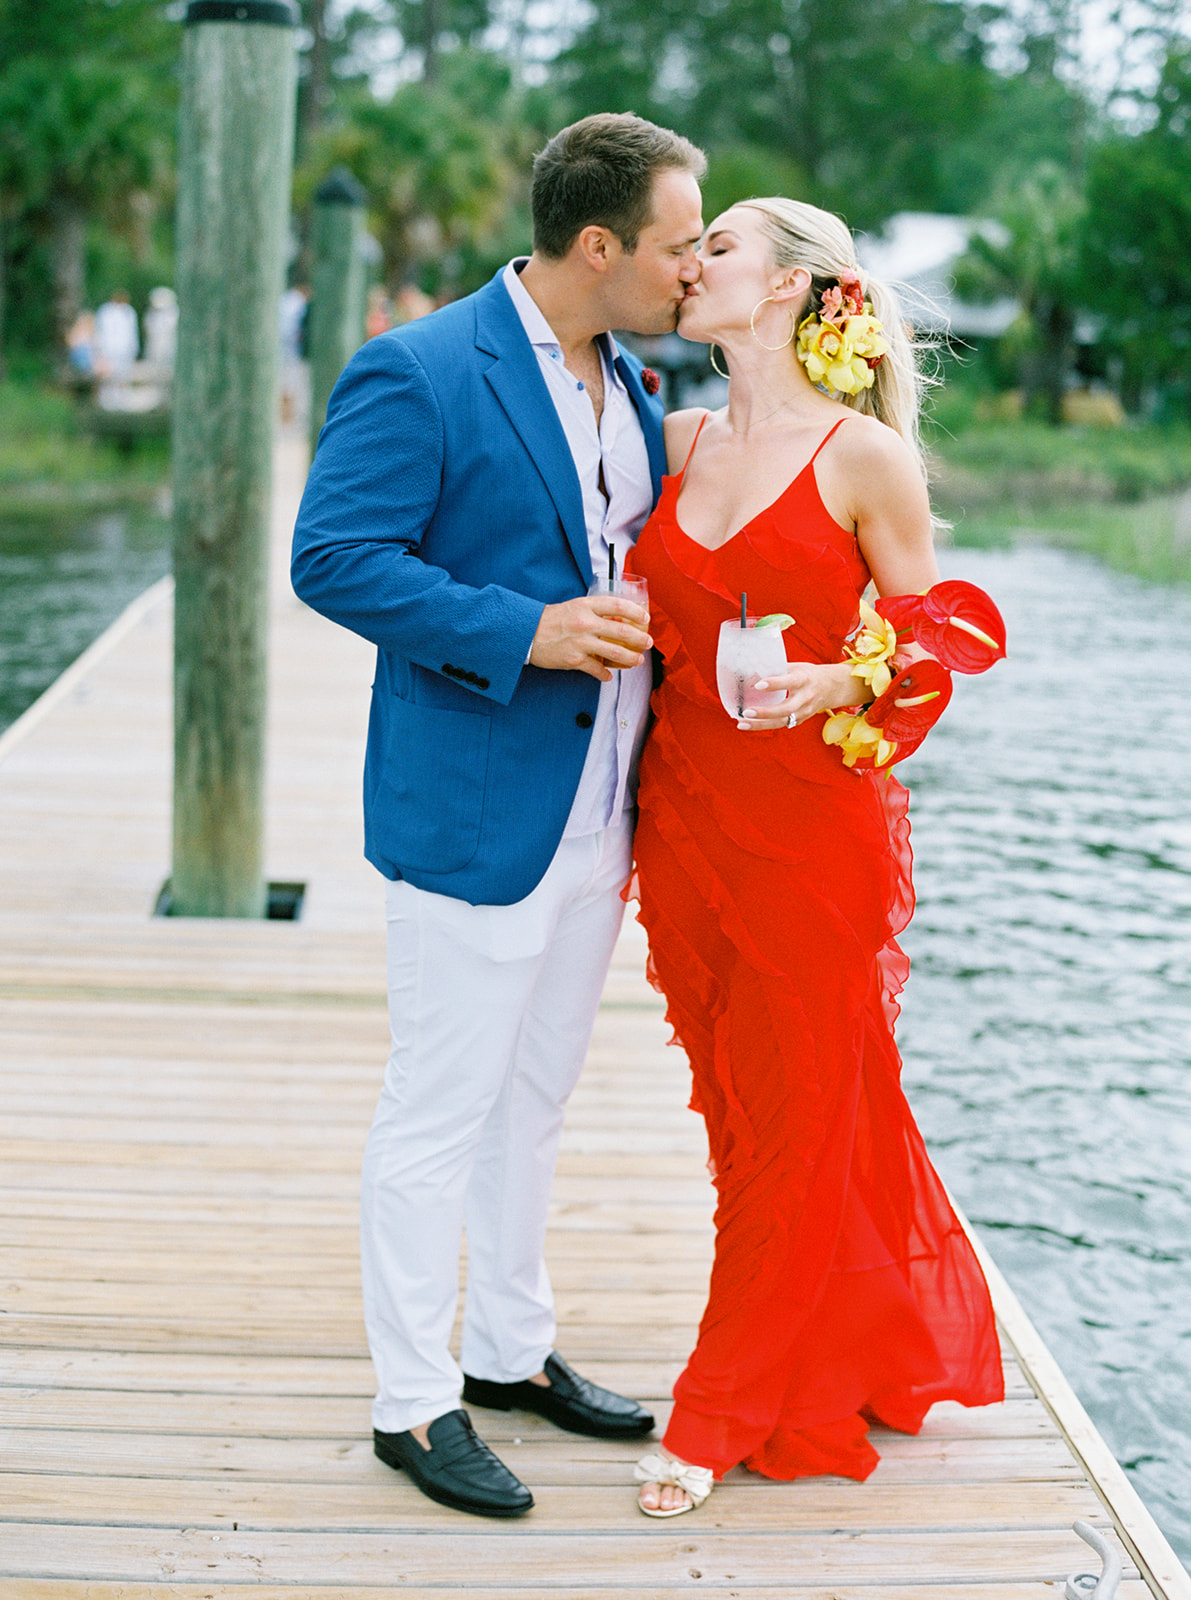 Autumn & Philip's Havana-Inspired Party at Moreland Landing, a destination within the Palmetto Bluff Property.